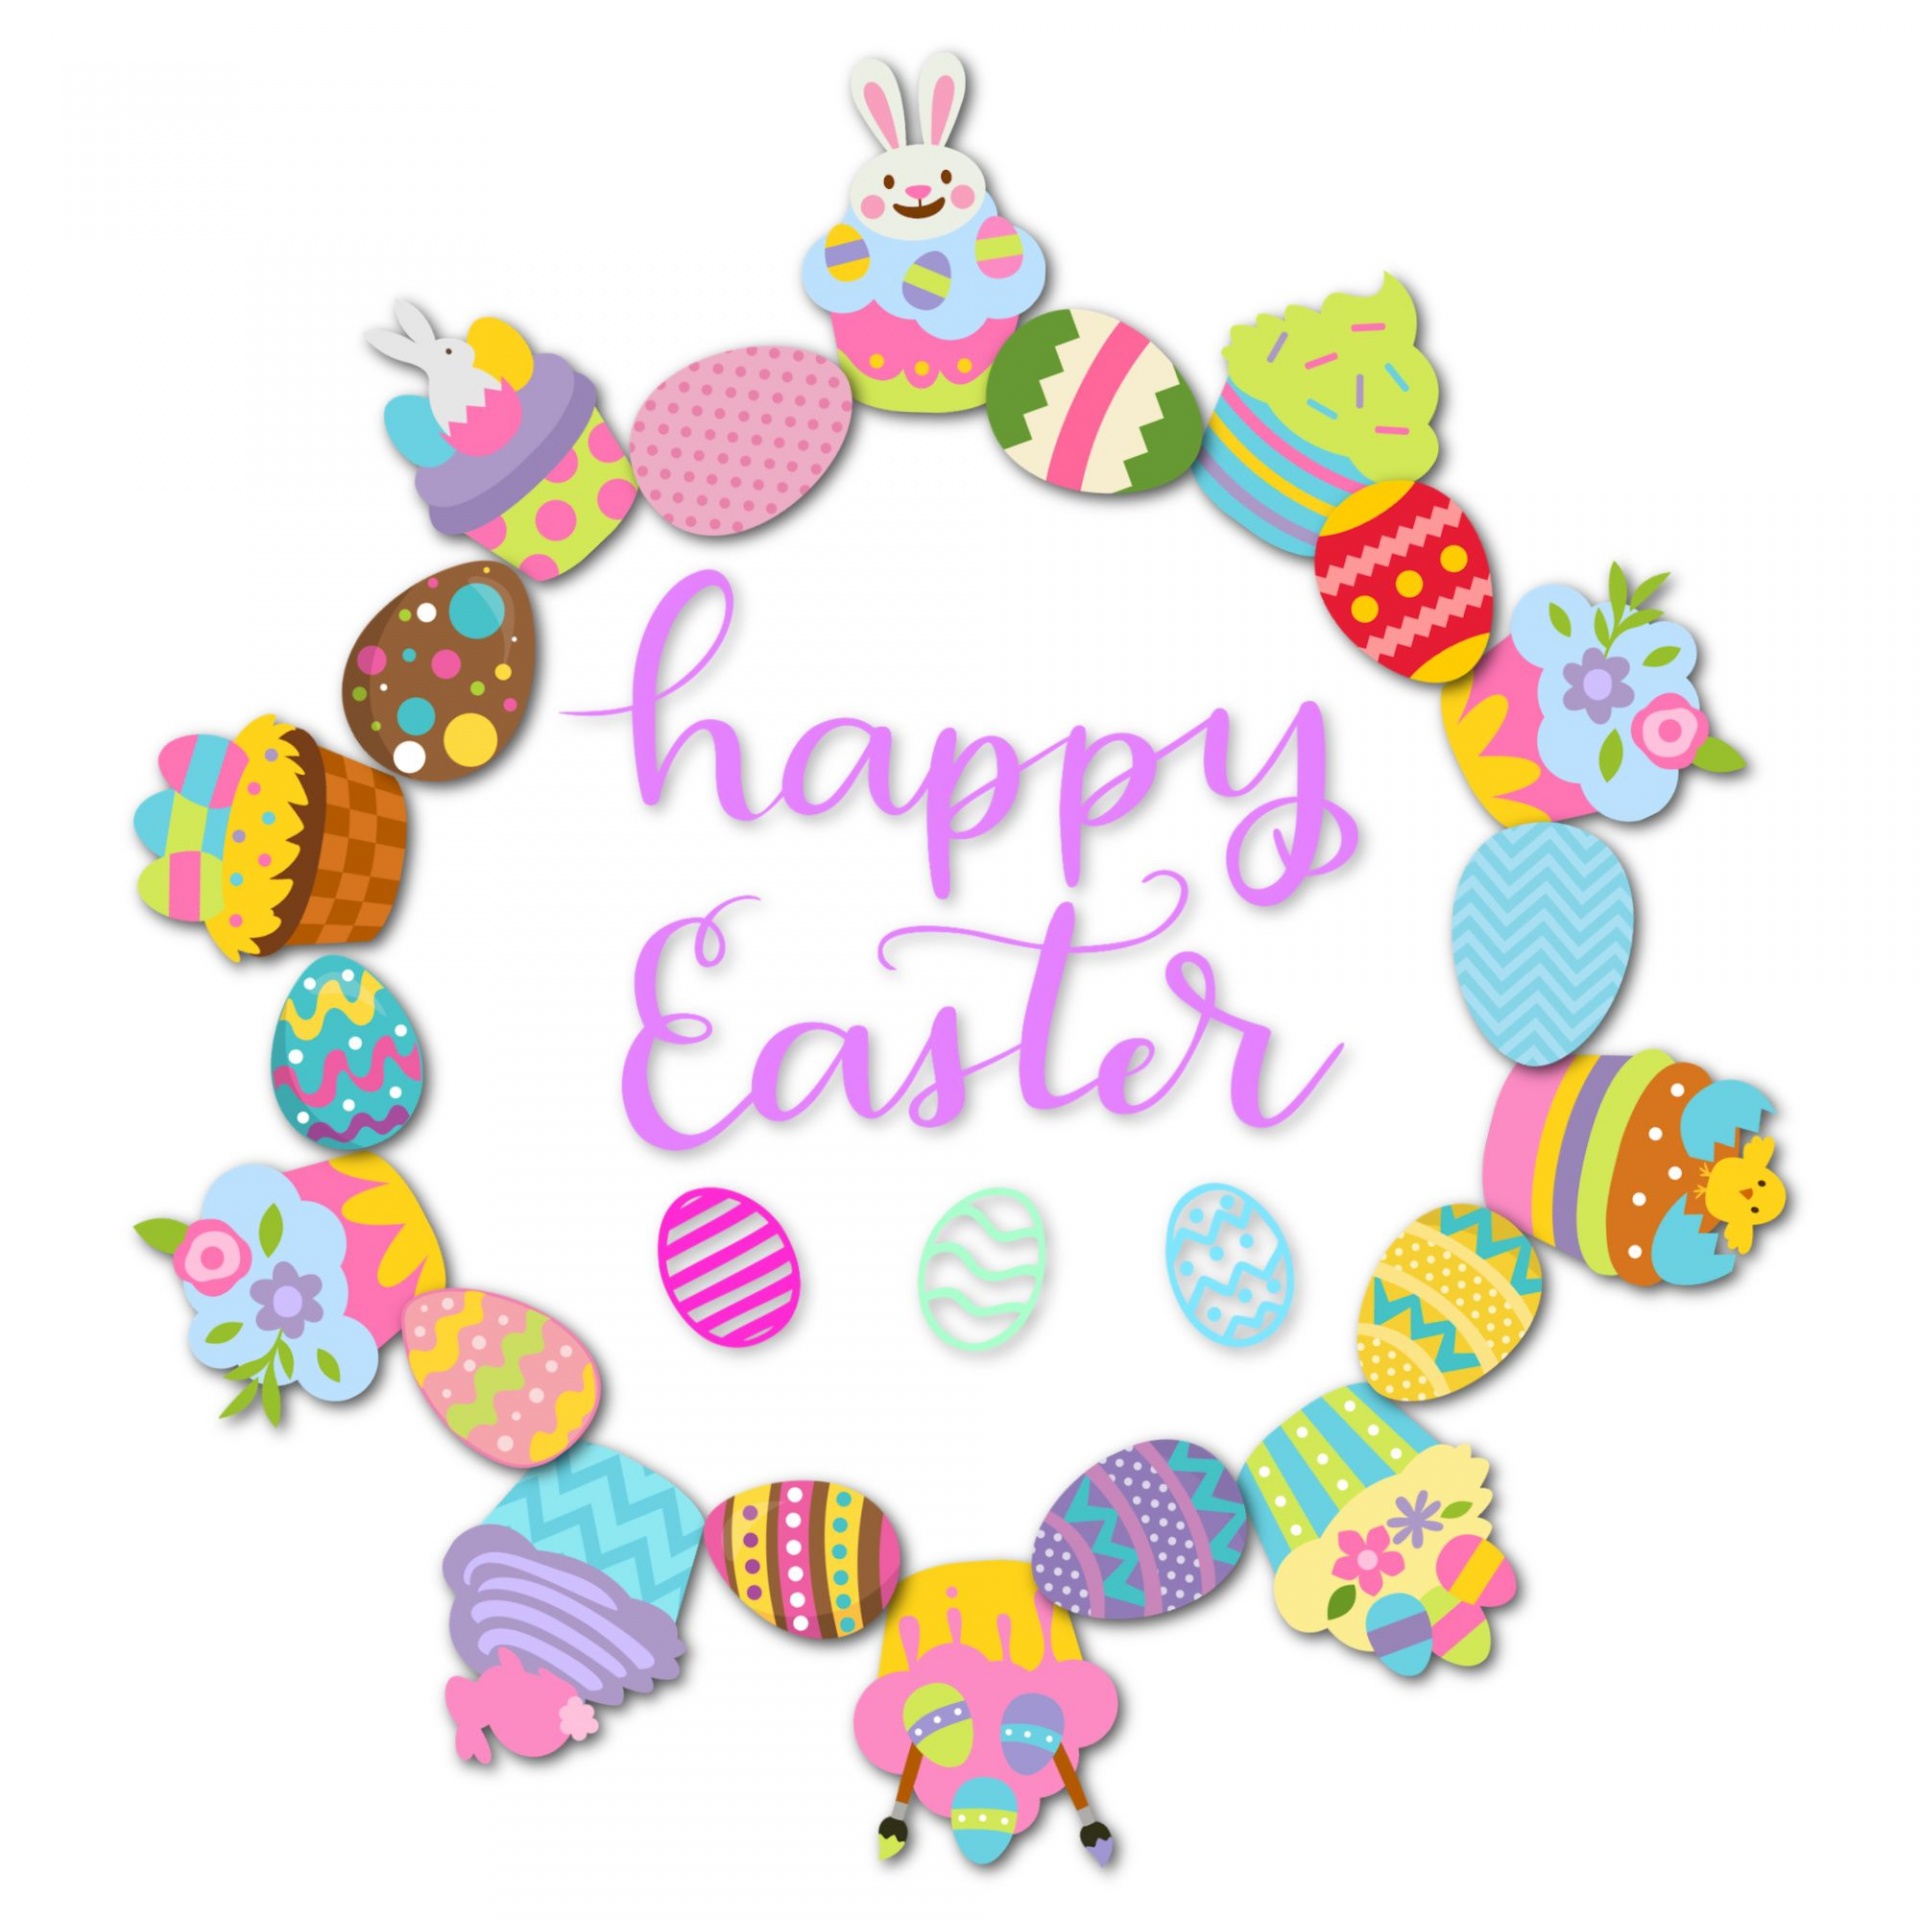 colorful wreath of cupcakes and decorated easter eggs with greeting in the center